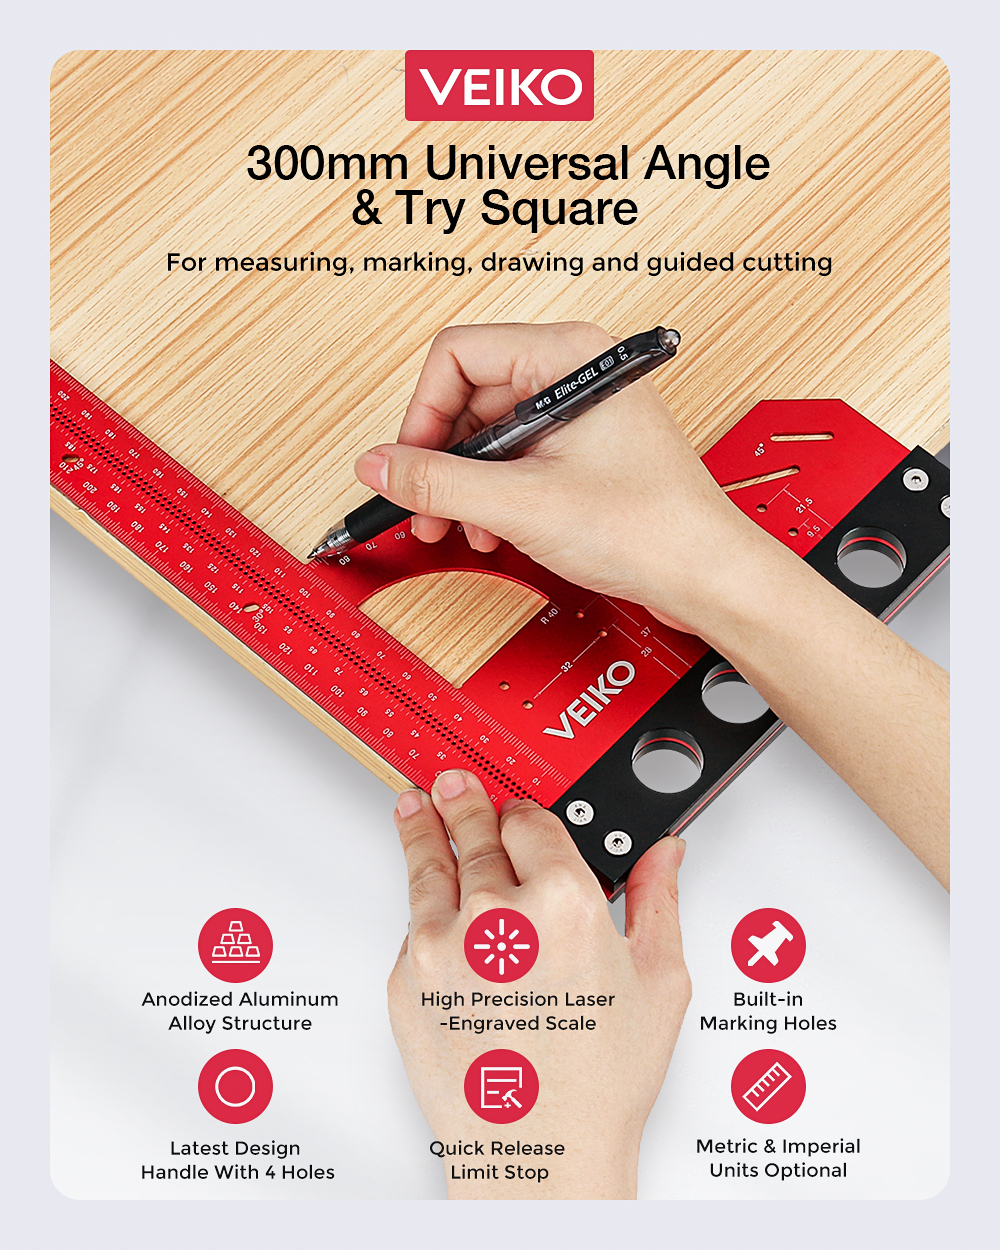 VEIKO-300mm-Universal-Angle-Ruler-Multifunctional-Try-Square-Precision-Woodworking-Scriber-Marking-R-1908772-1